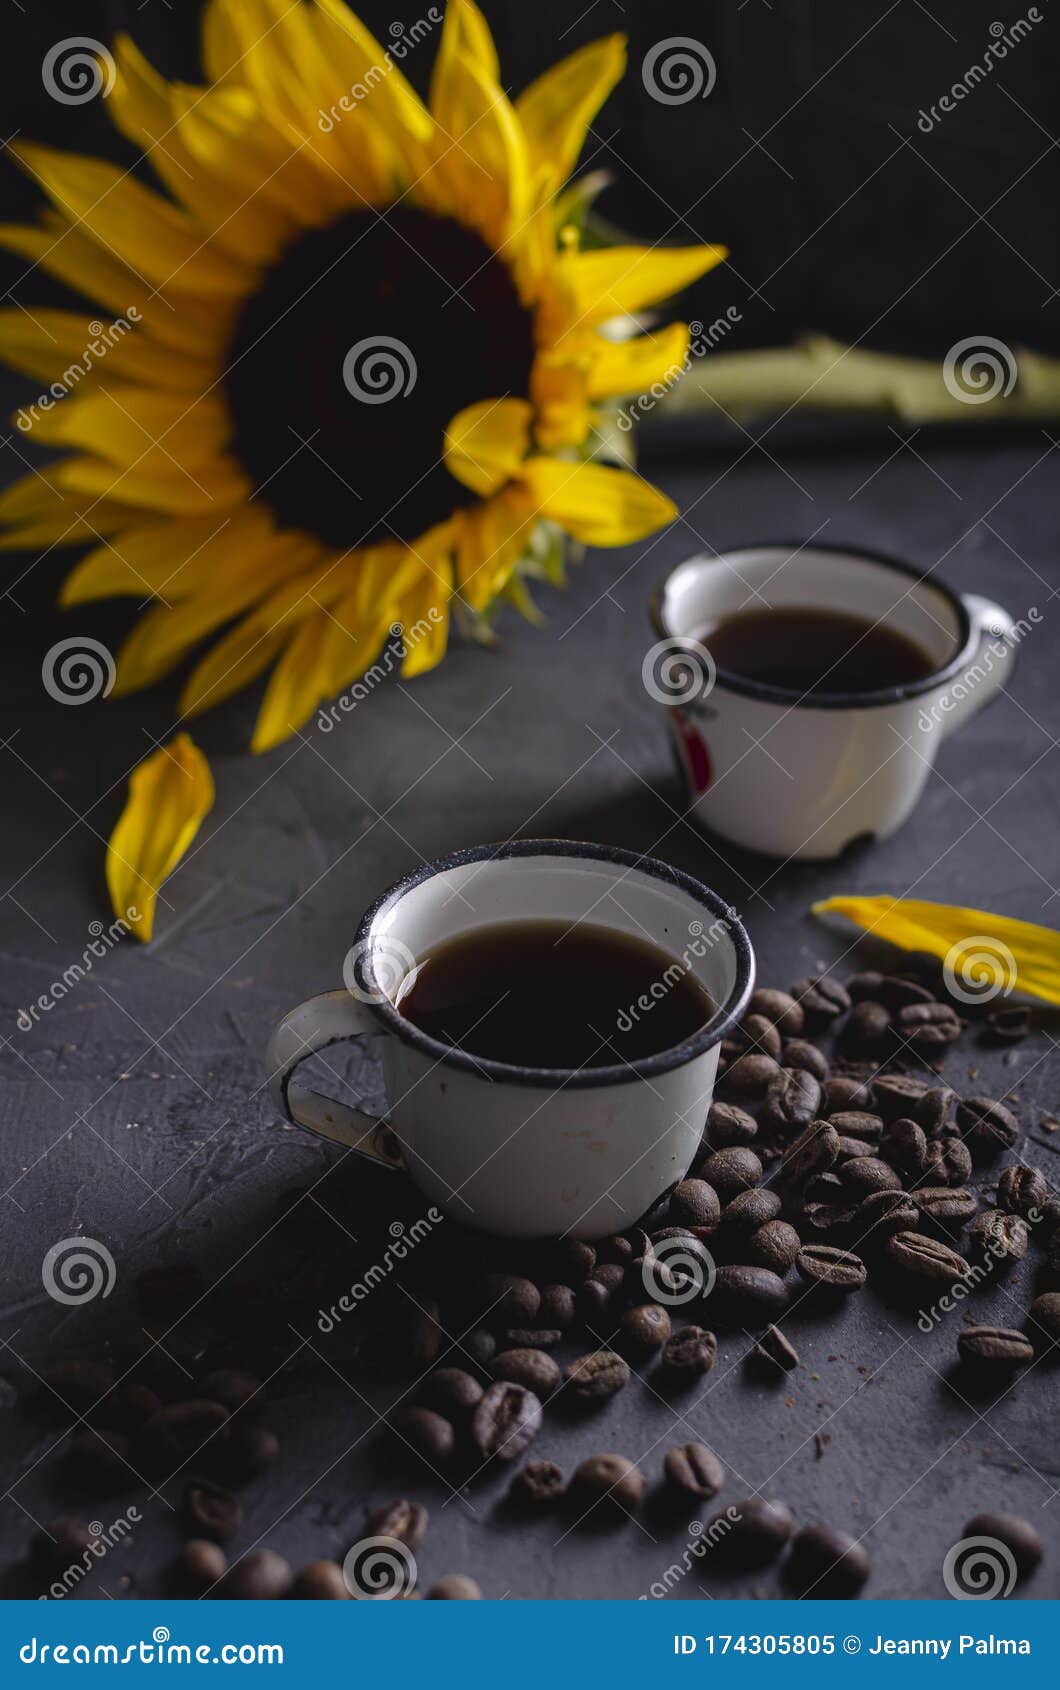 cup of coffe with flower